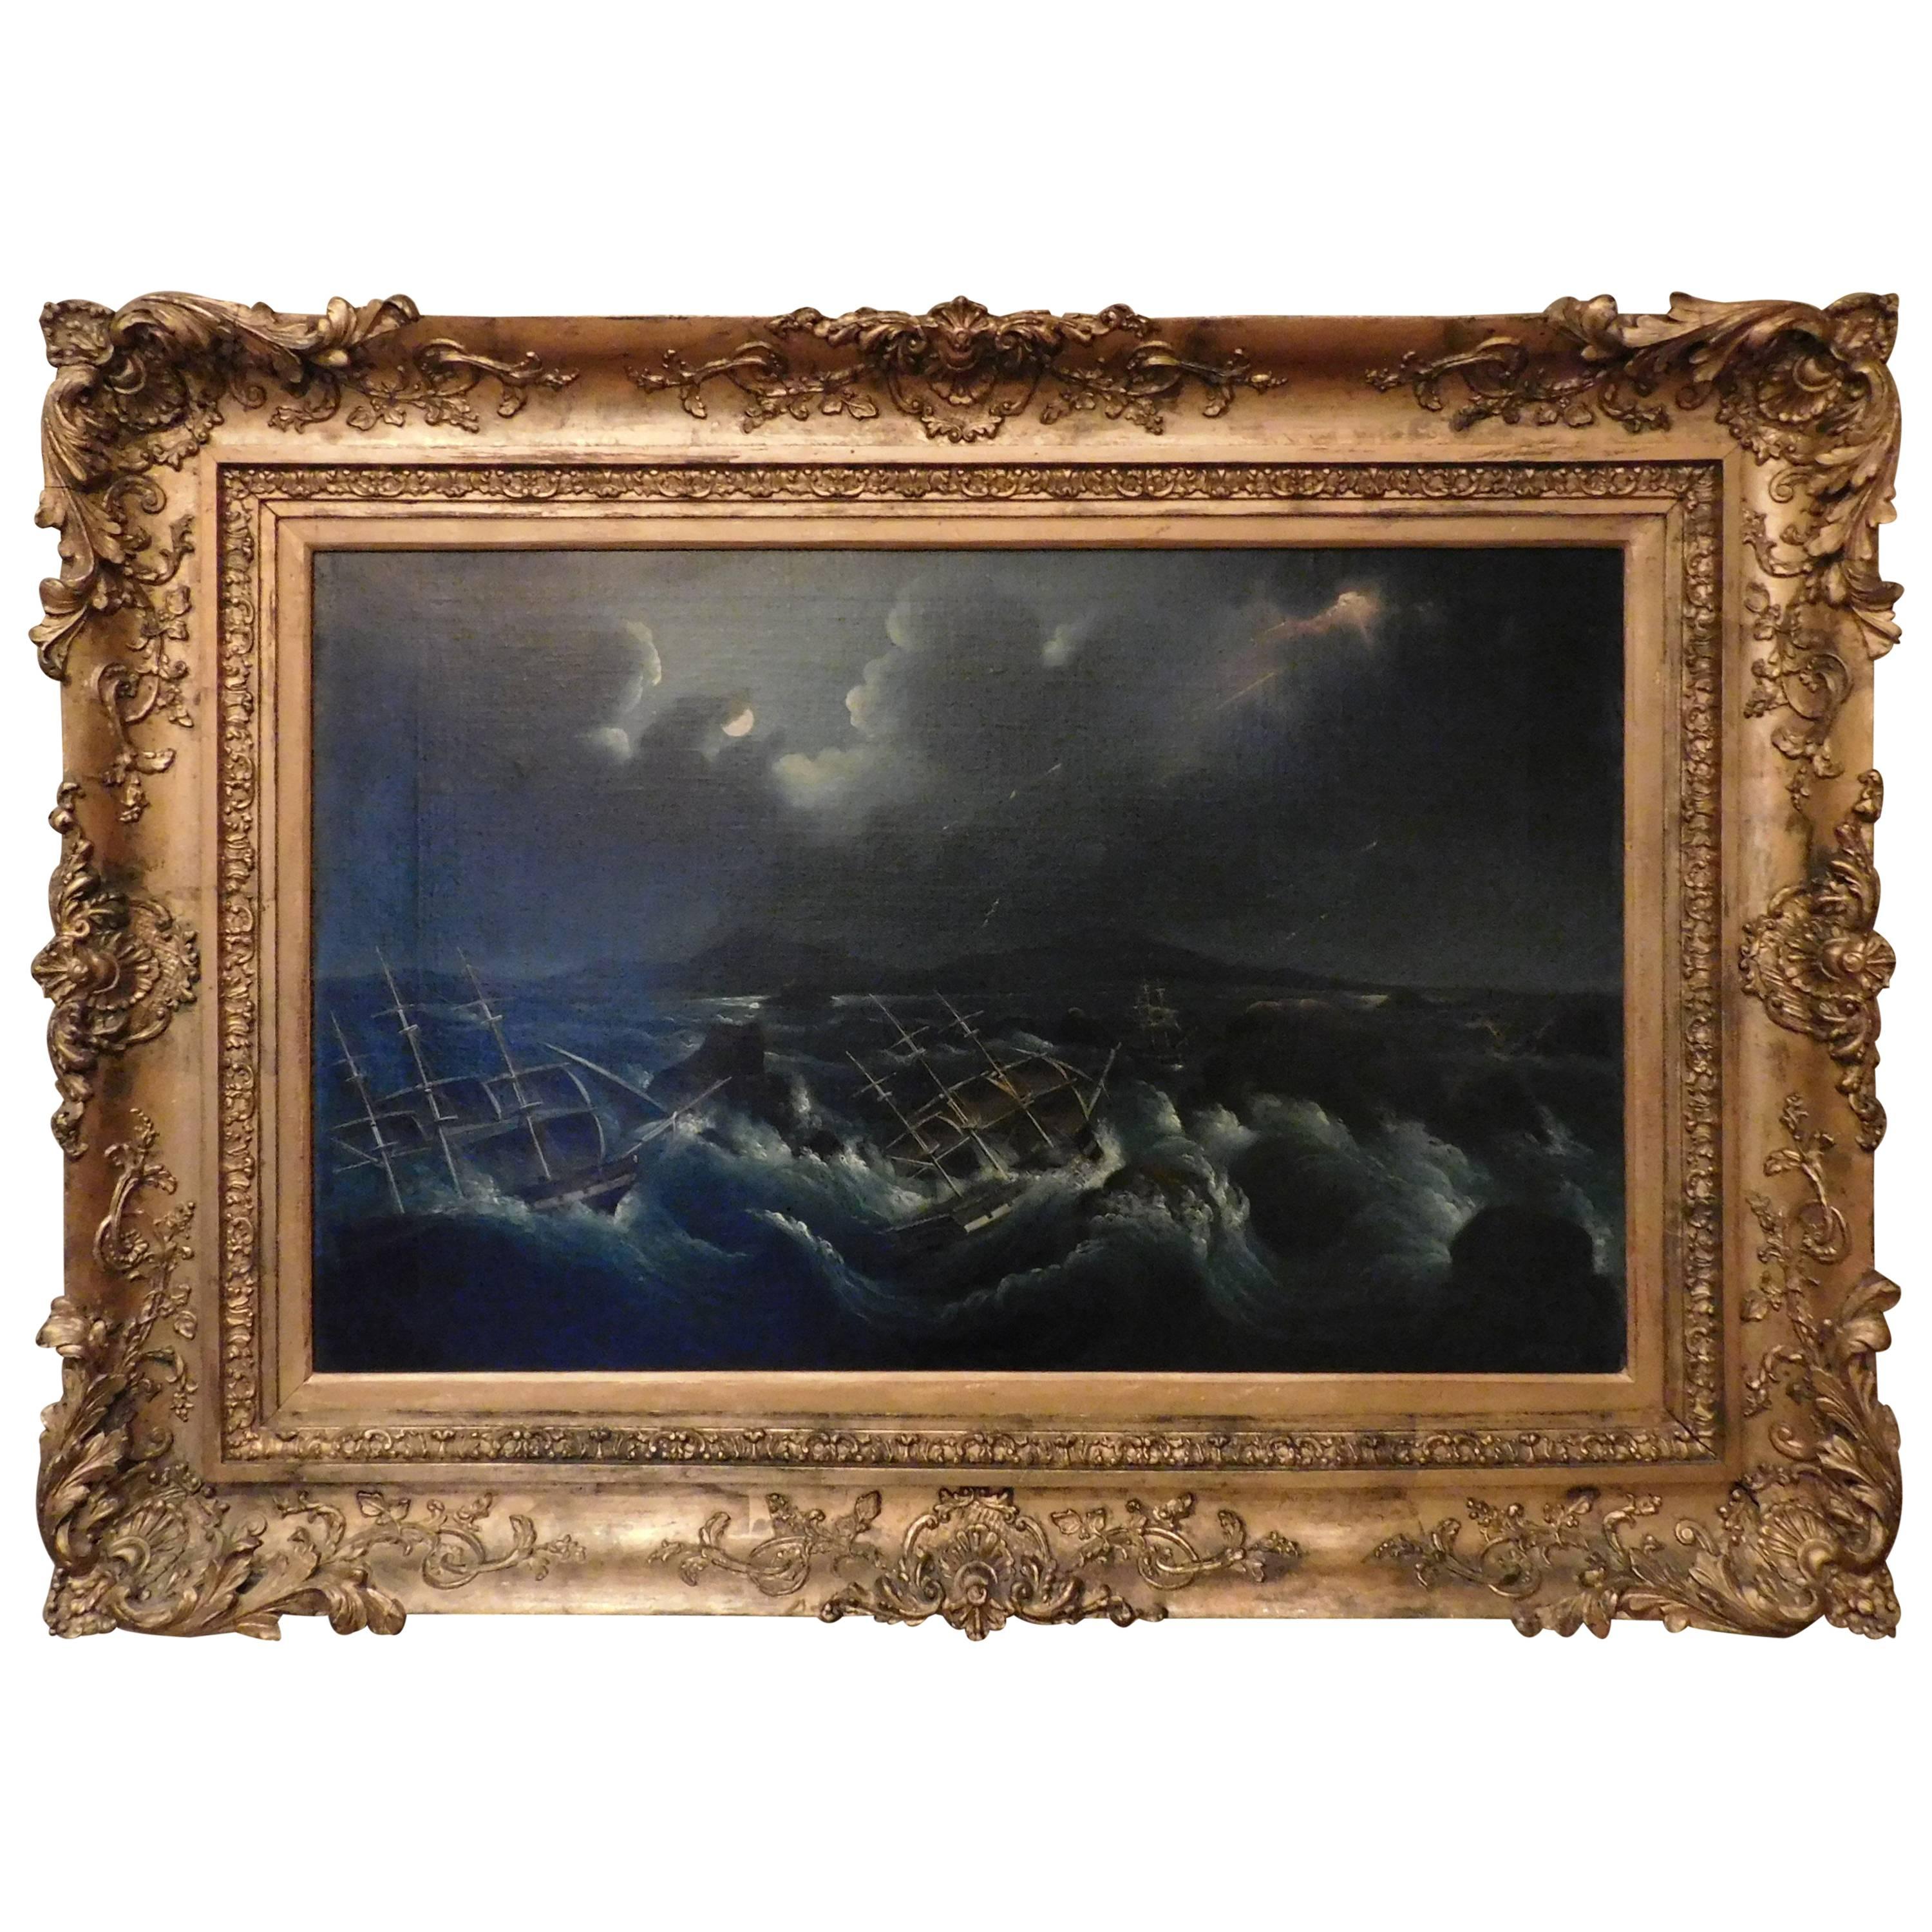 Oil on Canvas "Peril at Sea" by Thomas Horner, 1785-1844